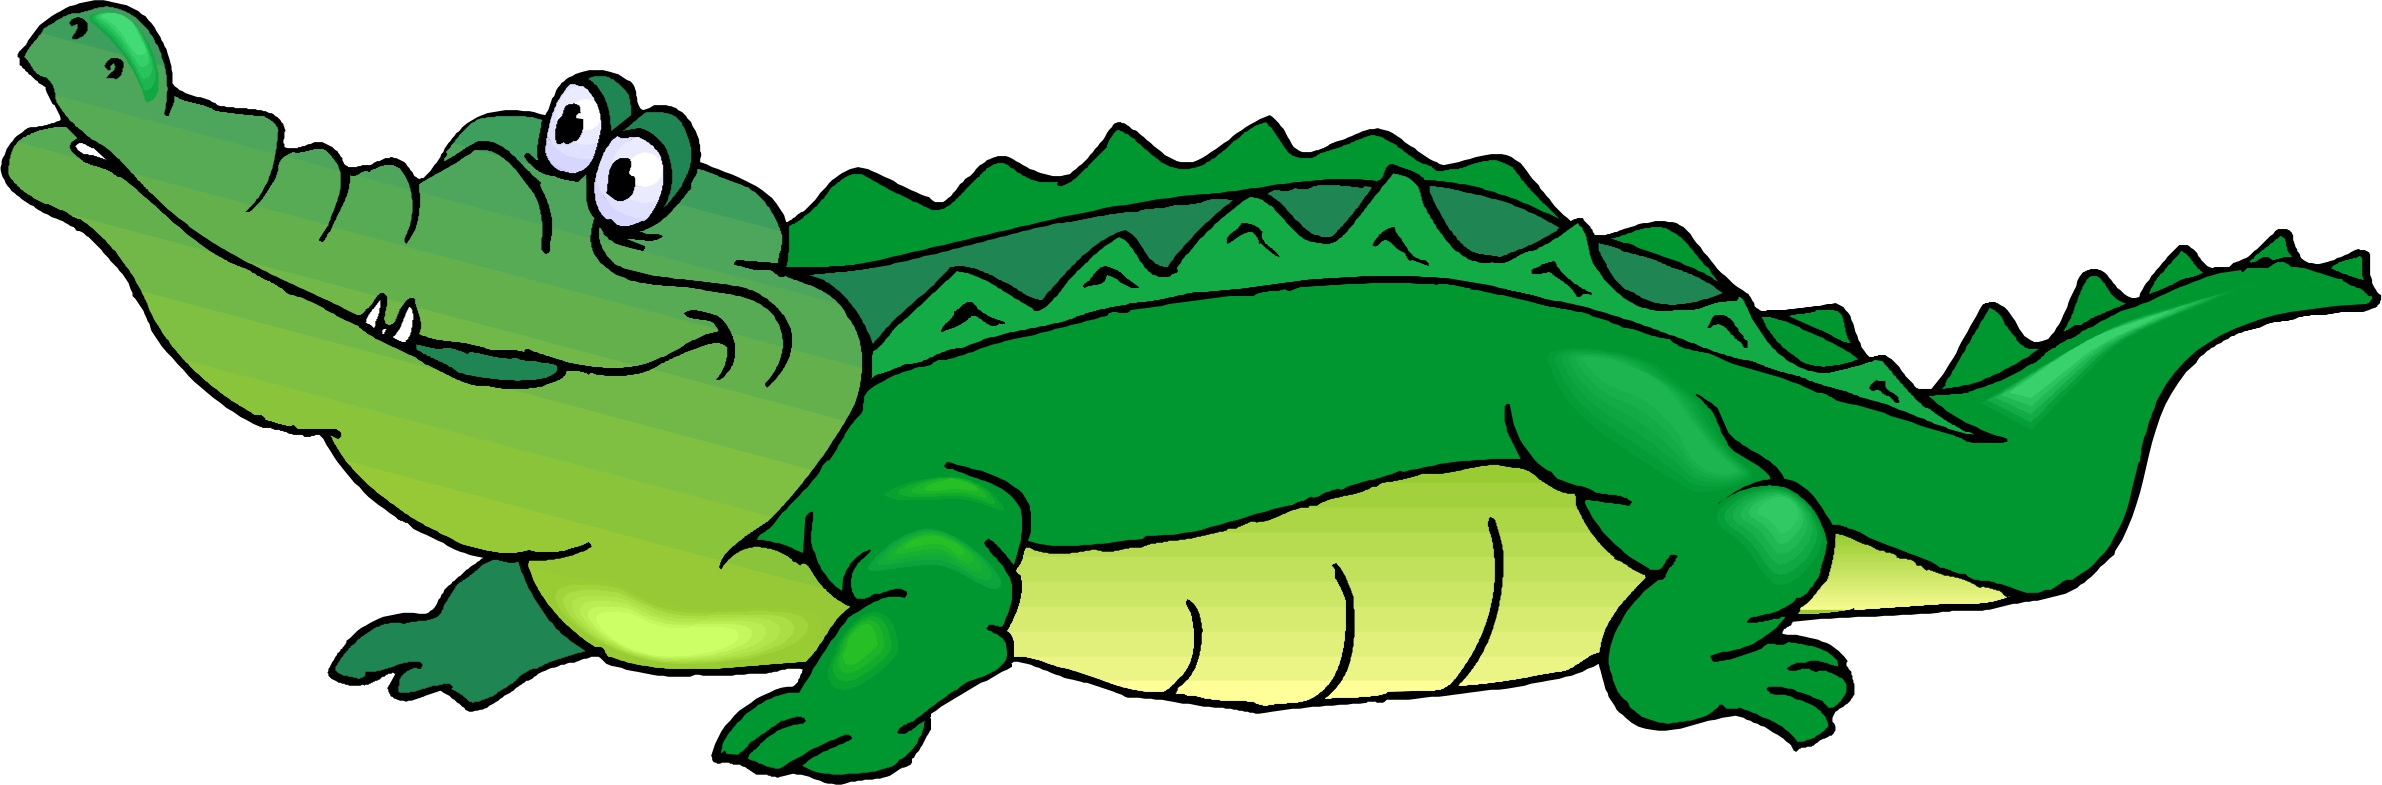 Crocodile clipart free images